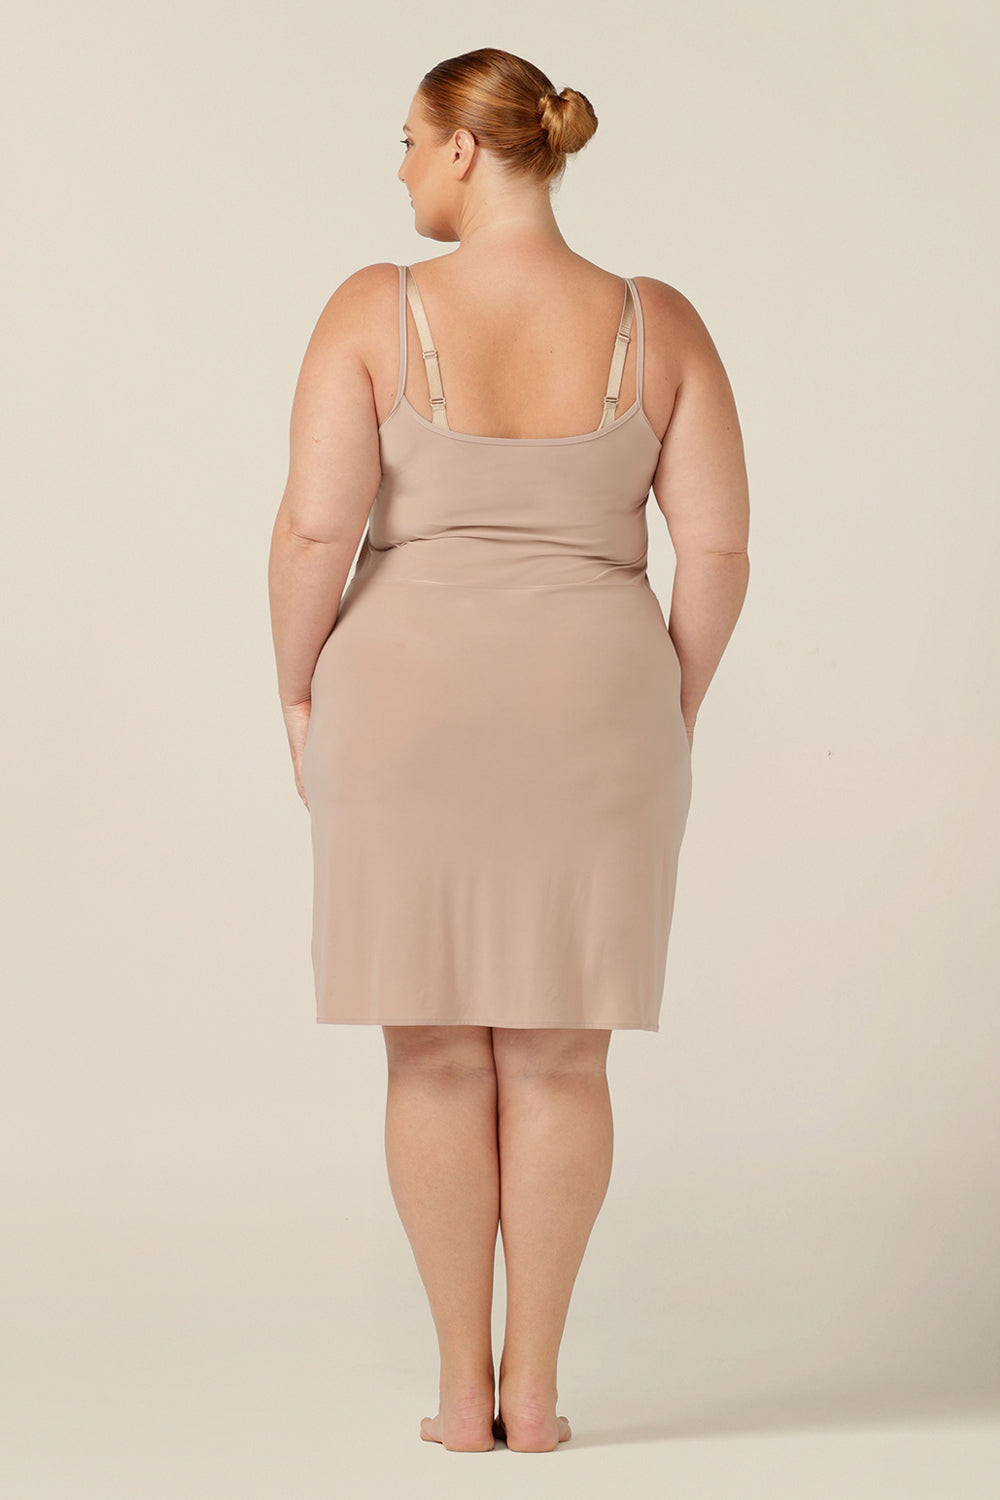 back view of a fuller figure, size 18 woman wearing a neutral, mini-length slip. A reversible nude-coloured slip, this undergarment can have a V-neck or a scoop neck to give a smooth layer under dresses and skirts. Australian women's fashion that is perfect for wearing around the house as loungewear.